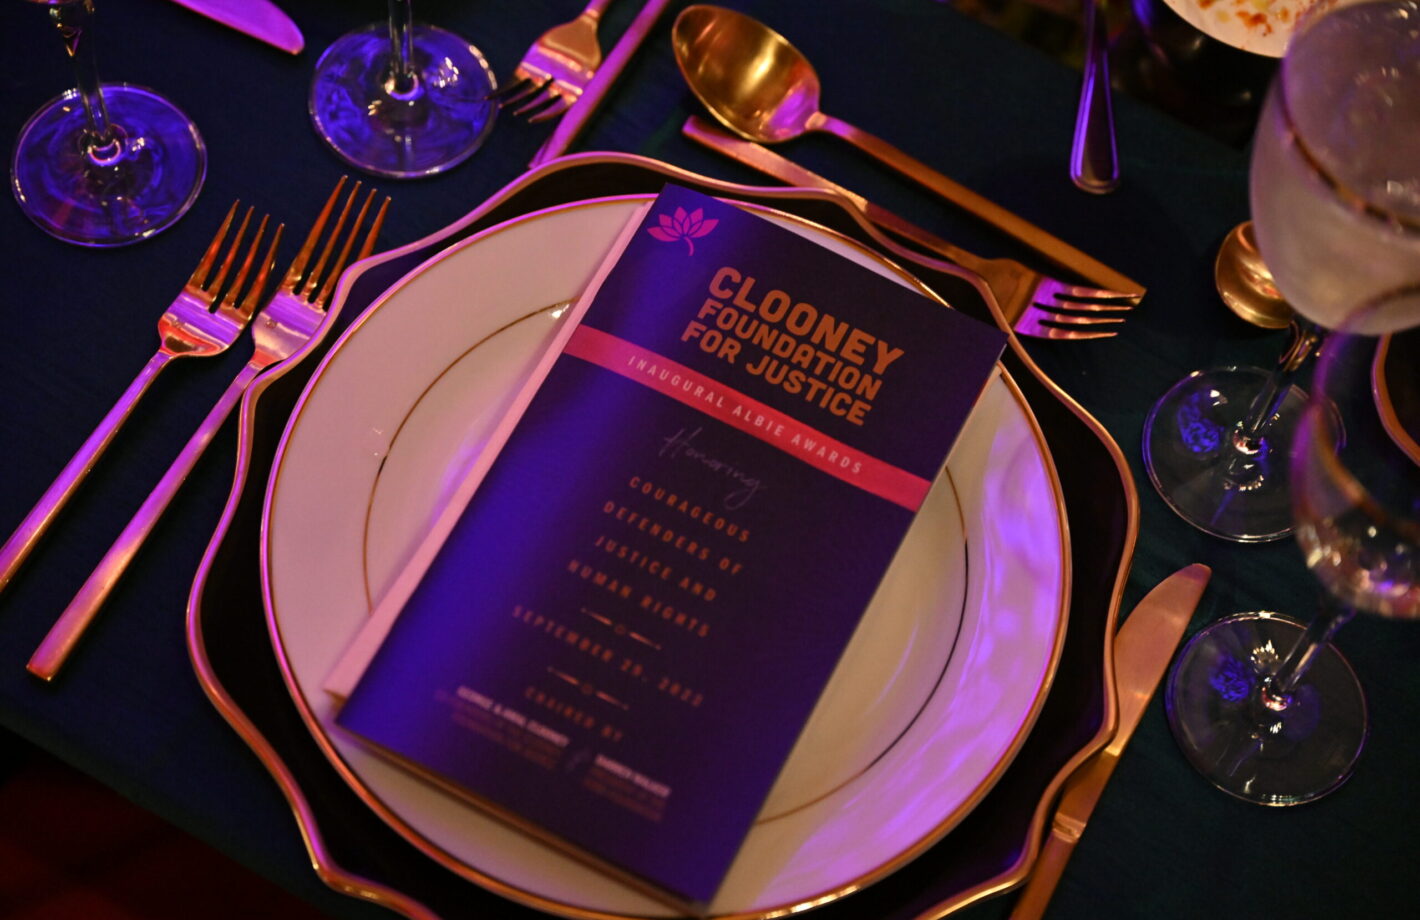 The table setting at the New York Public Library on the day of the inaugural Albies ceremony